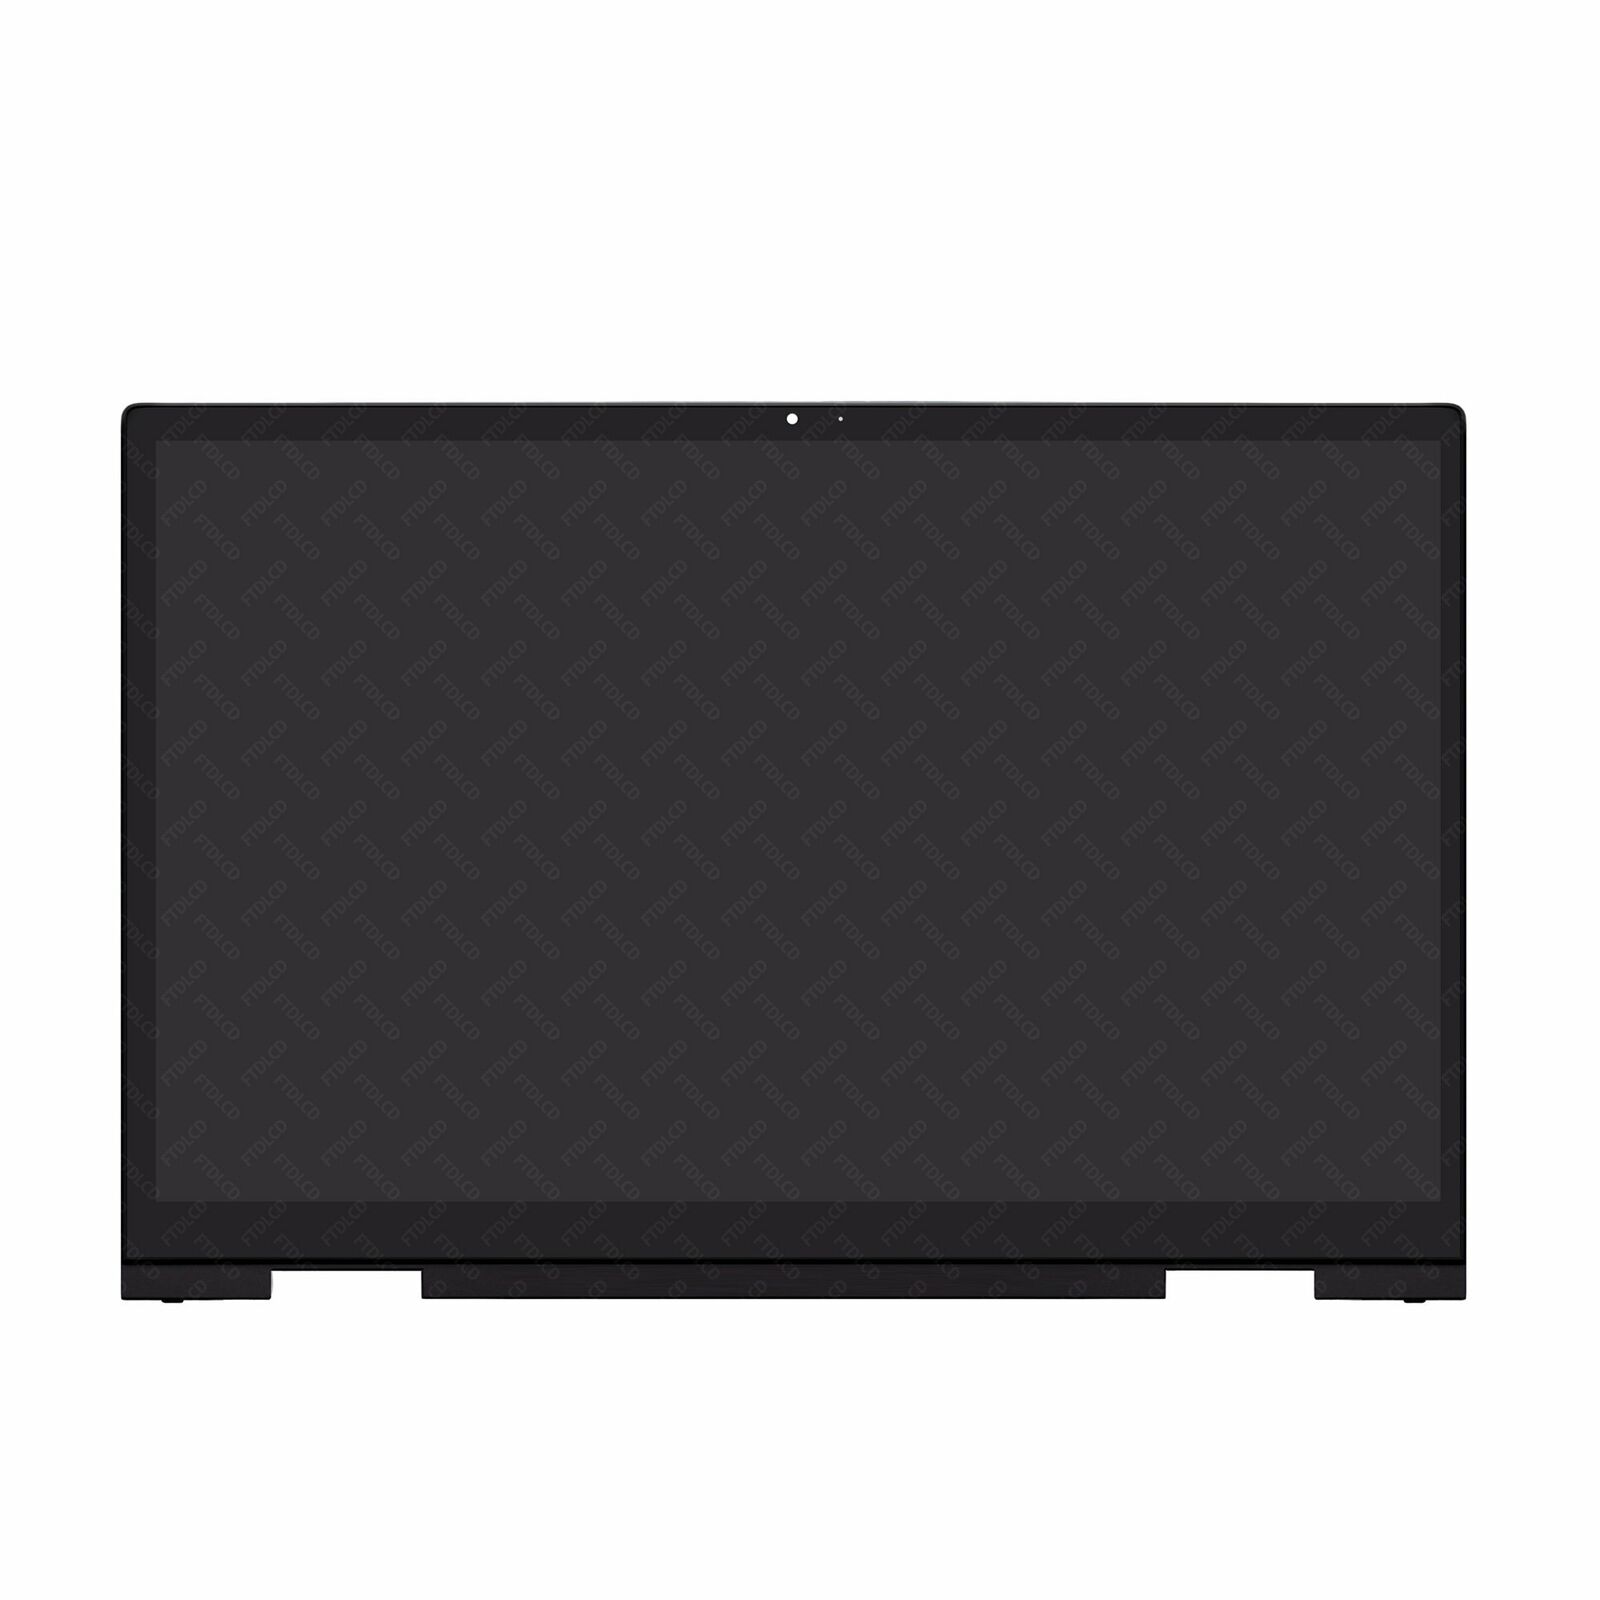 L93181-001 LCD Touch Screen Assembly for HP ENVY X360 15M-EE0013DX 15M-EE0023DX